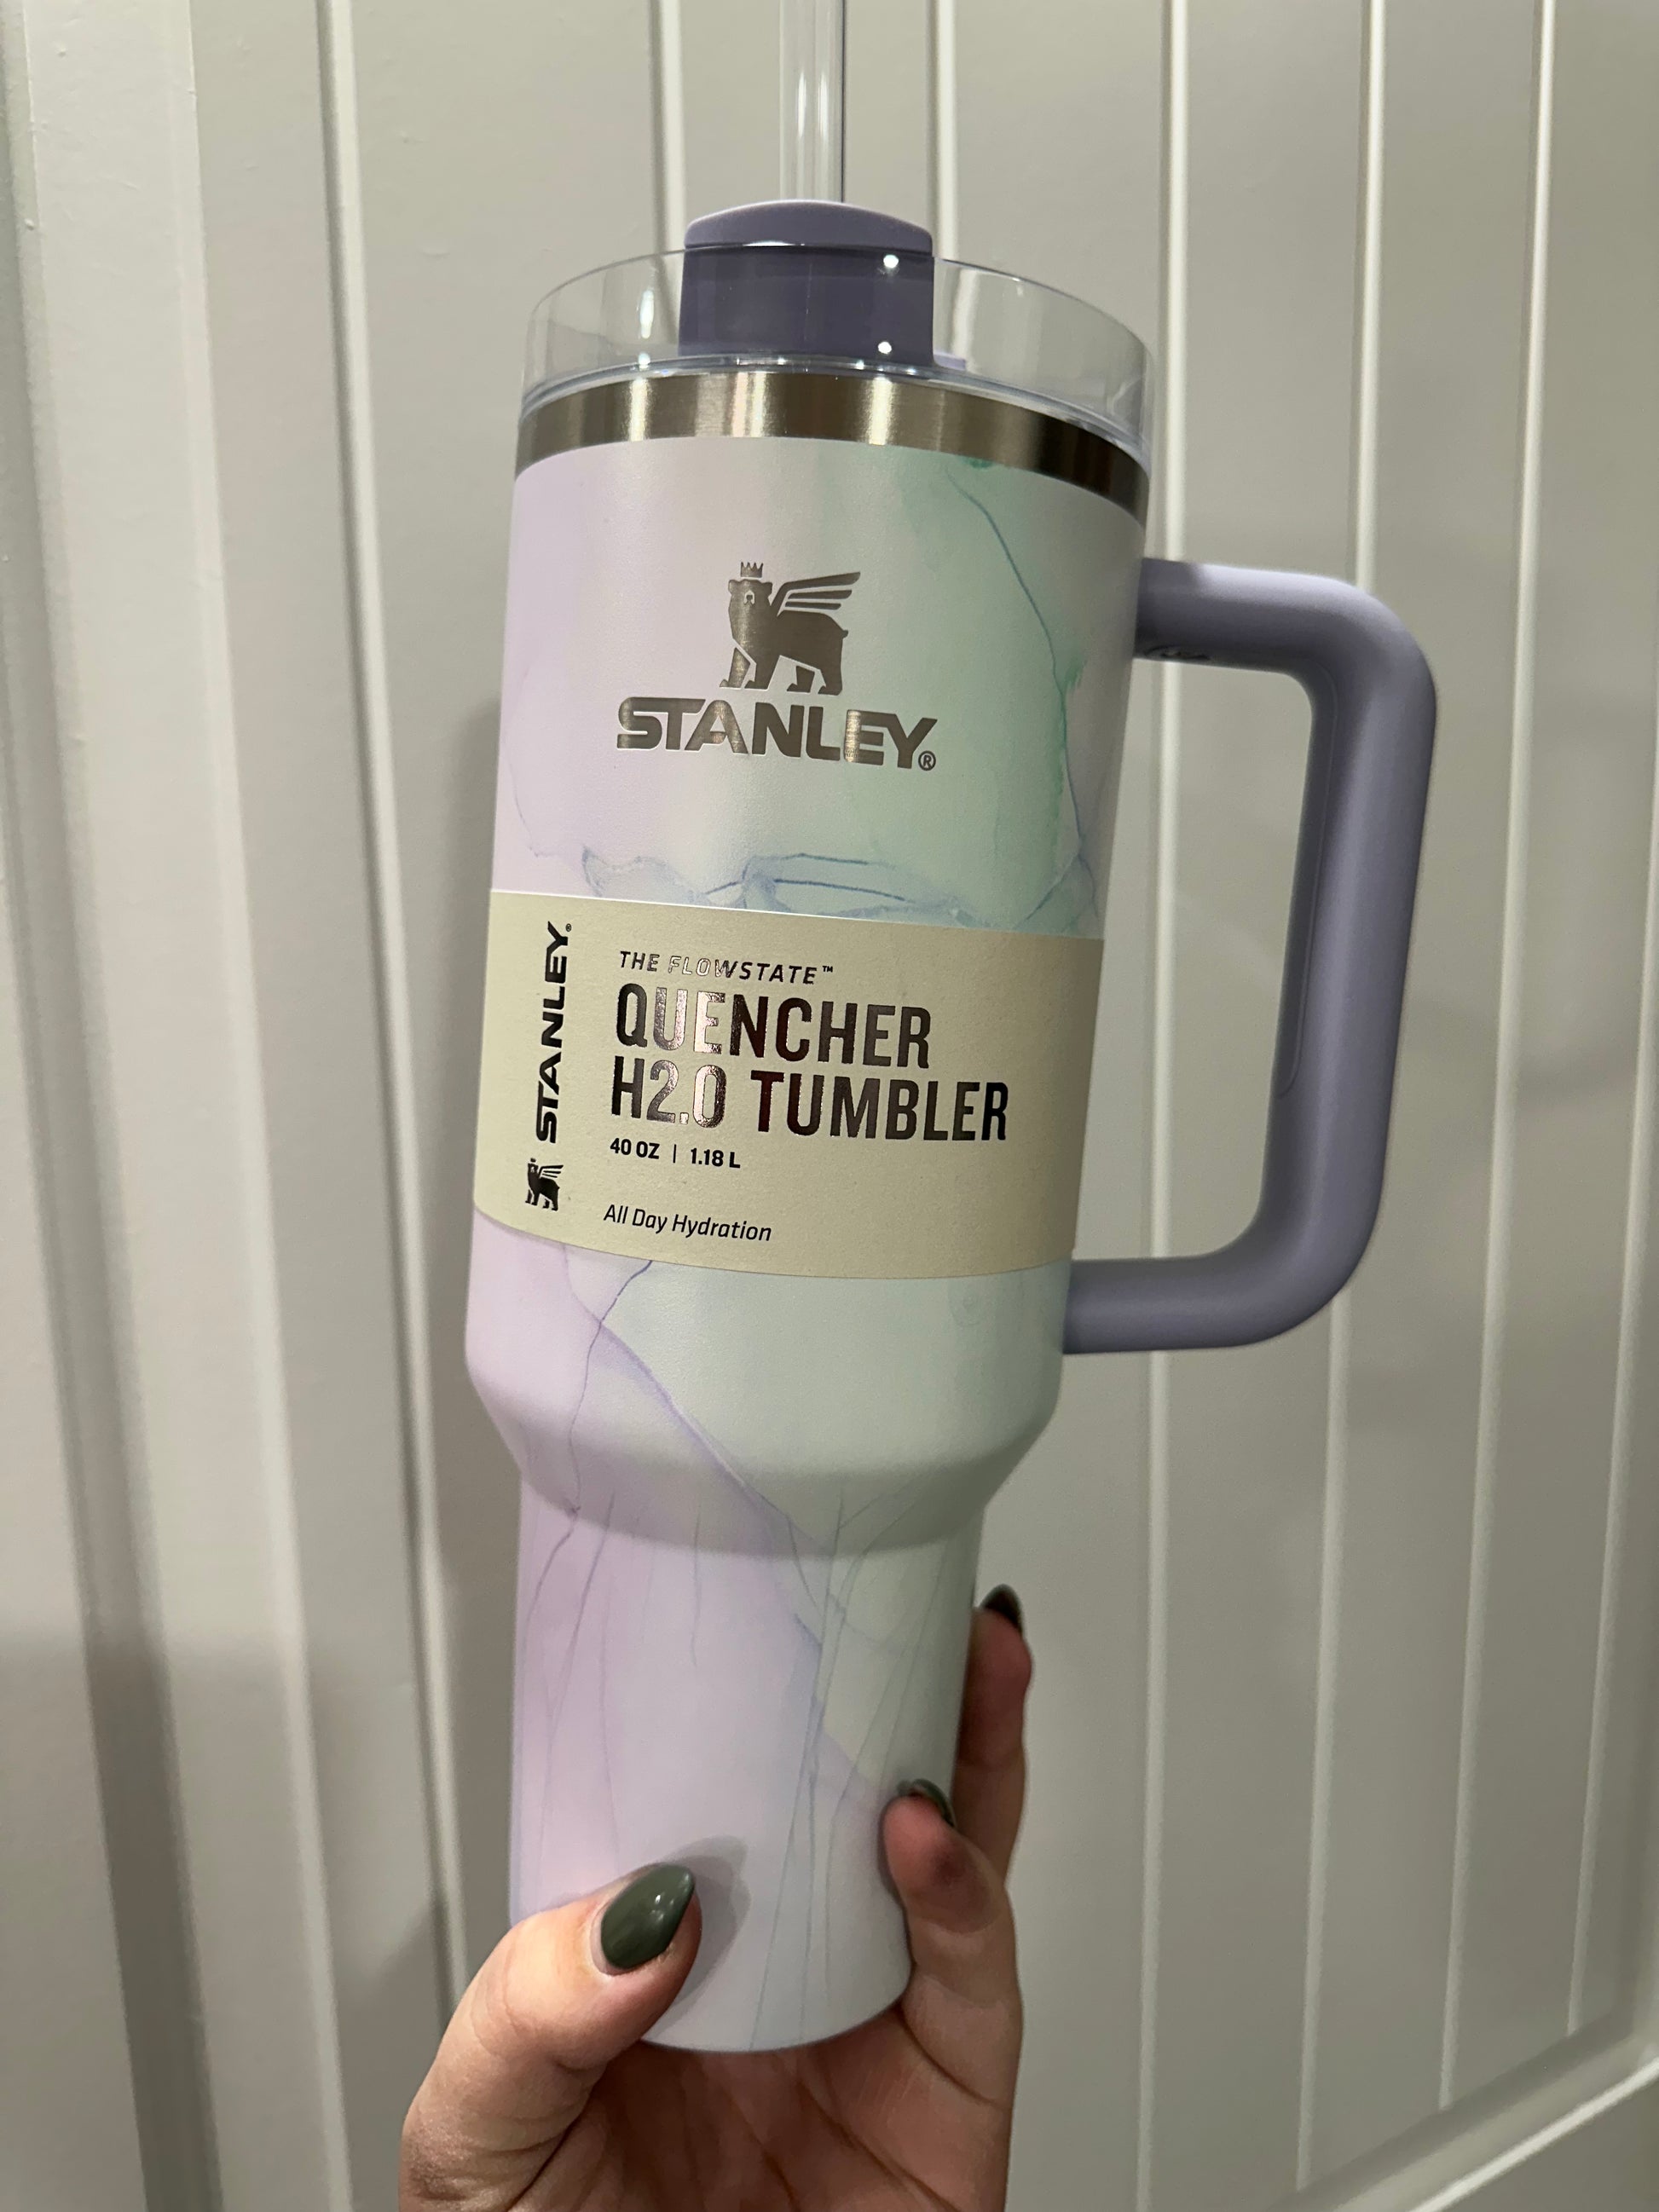 Stanley Quencher: Why are the cups so popular?